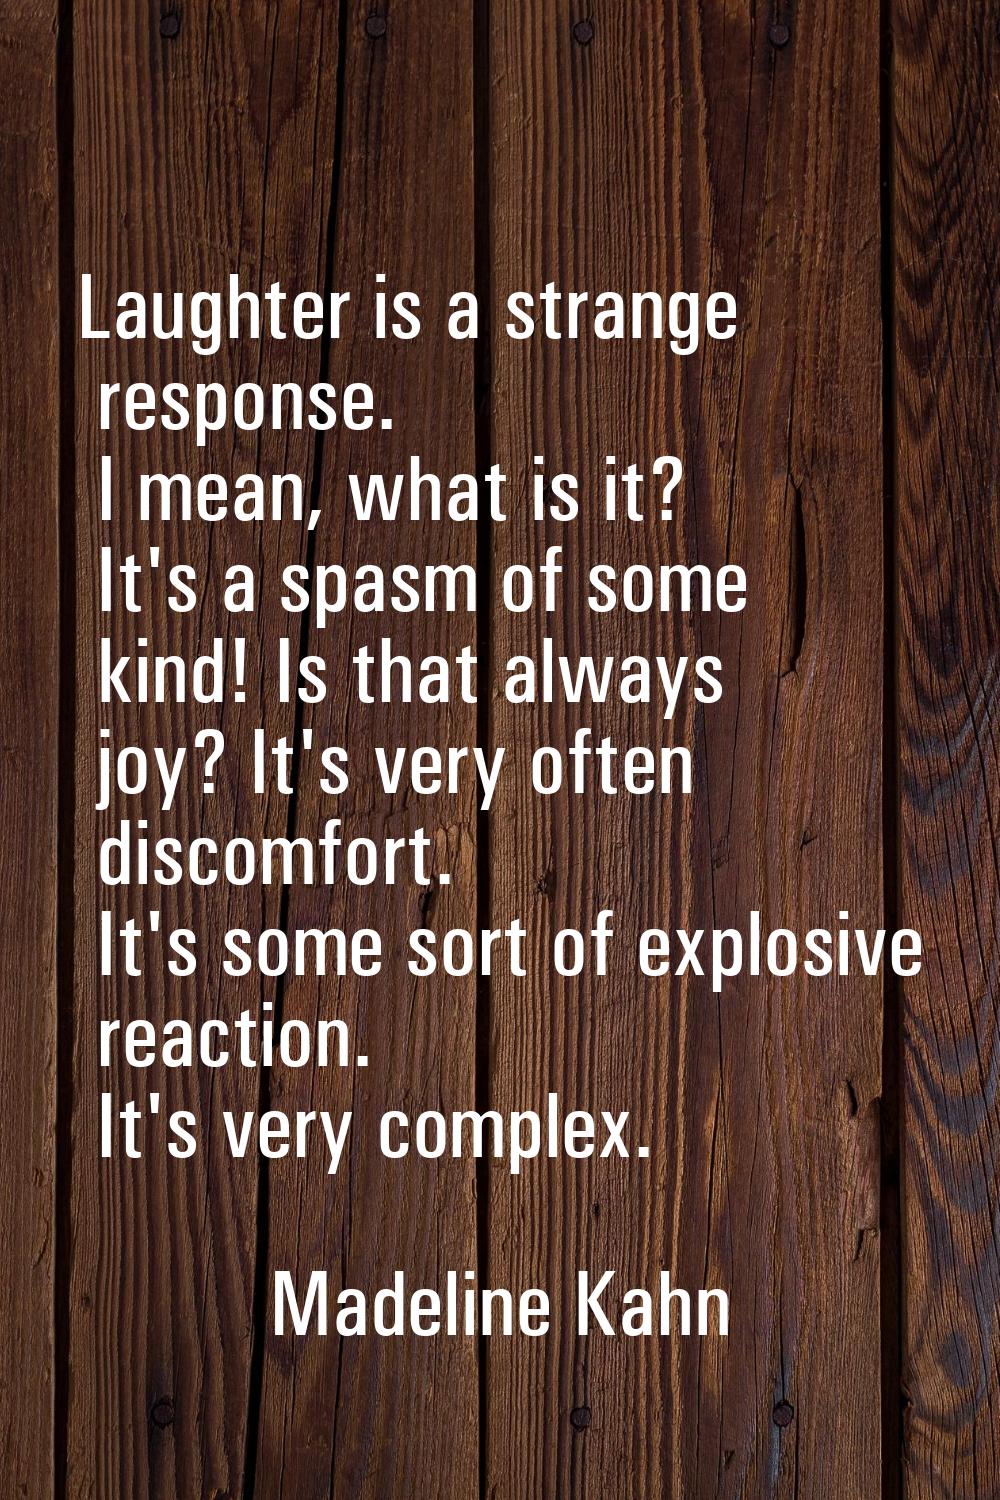 Laughter is a strange response. I mean, what is it? It's a spasm of some kind! Is that always joy? 